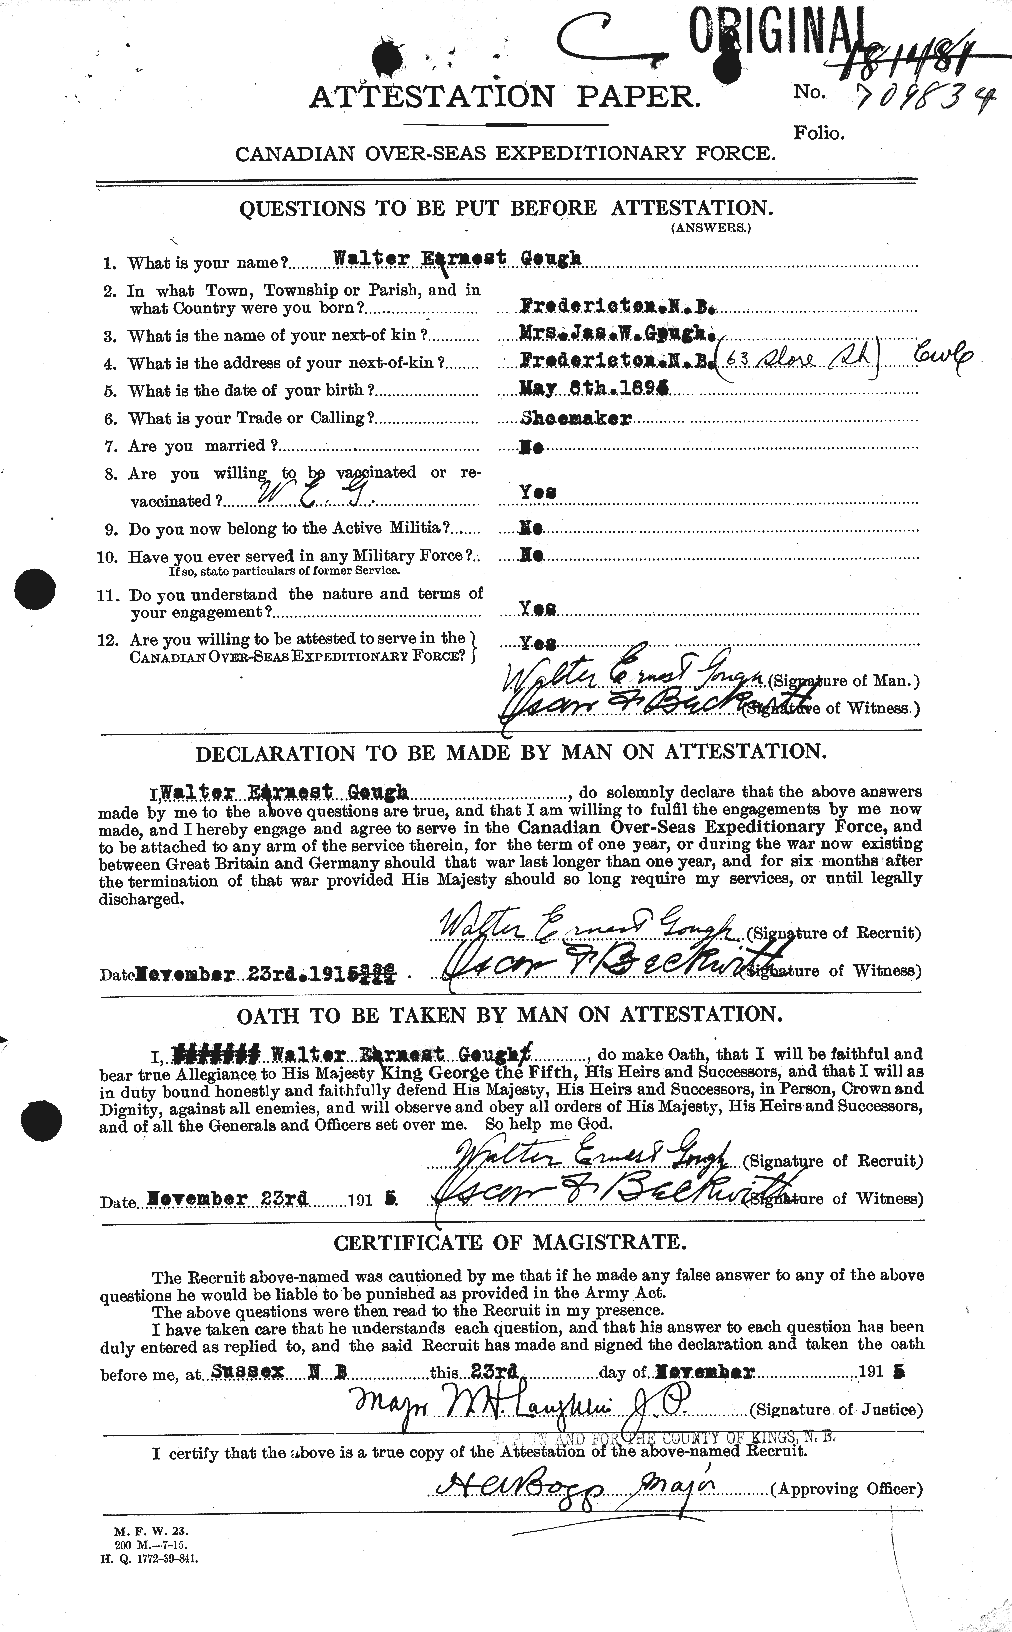 Personnel Records of the First World War - CEF 356462a